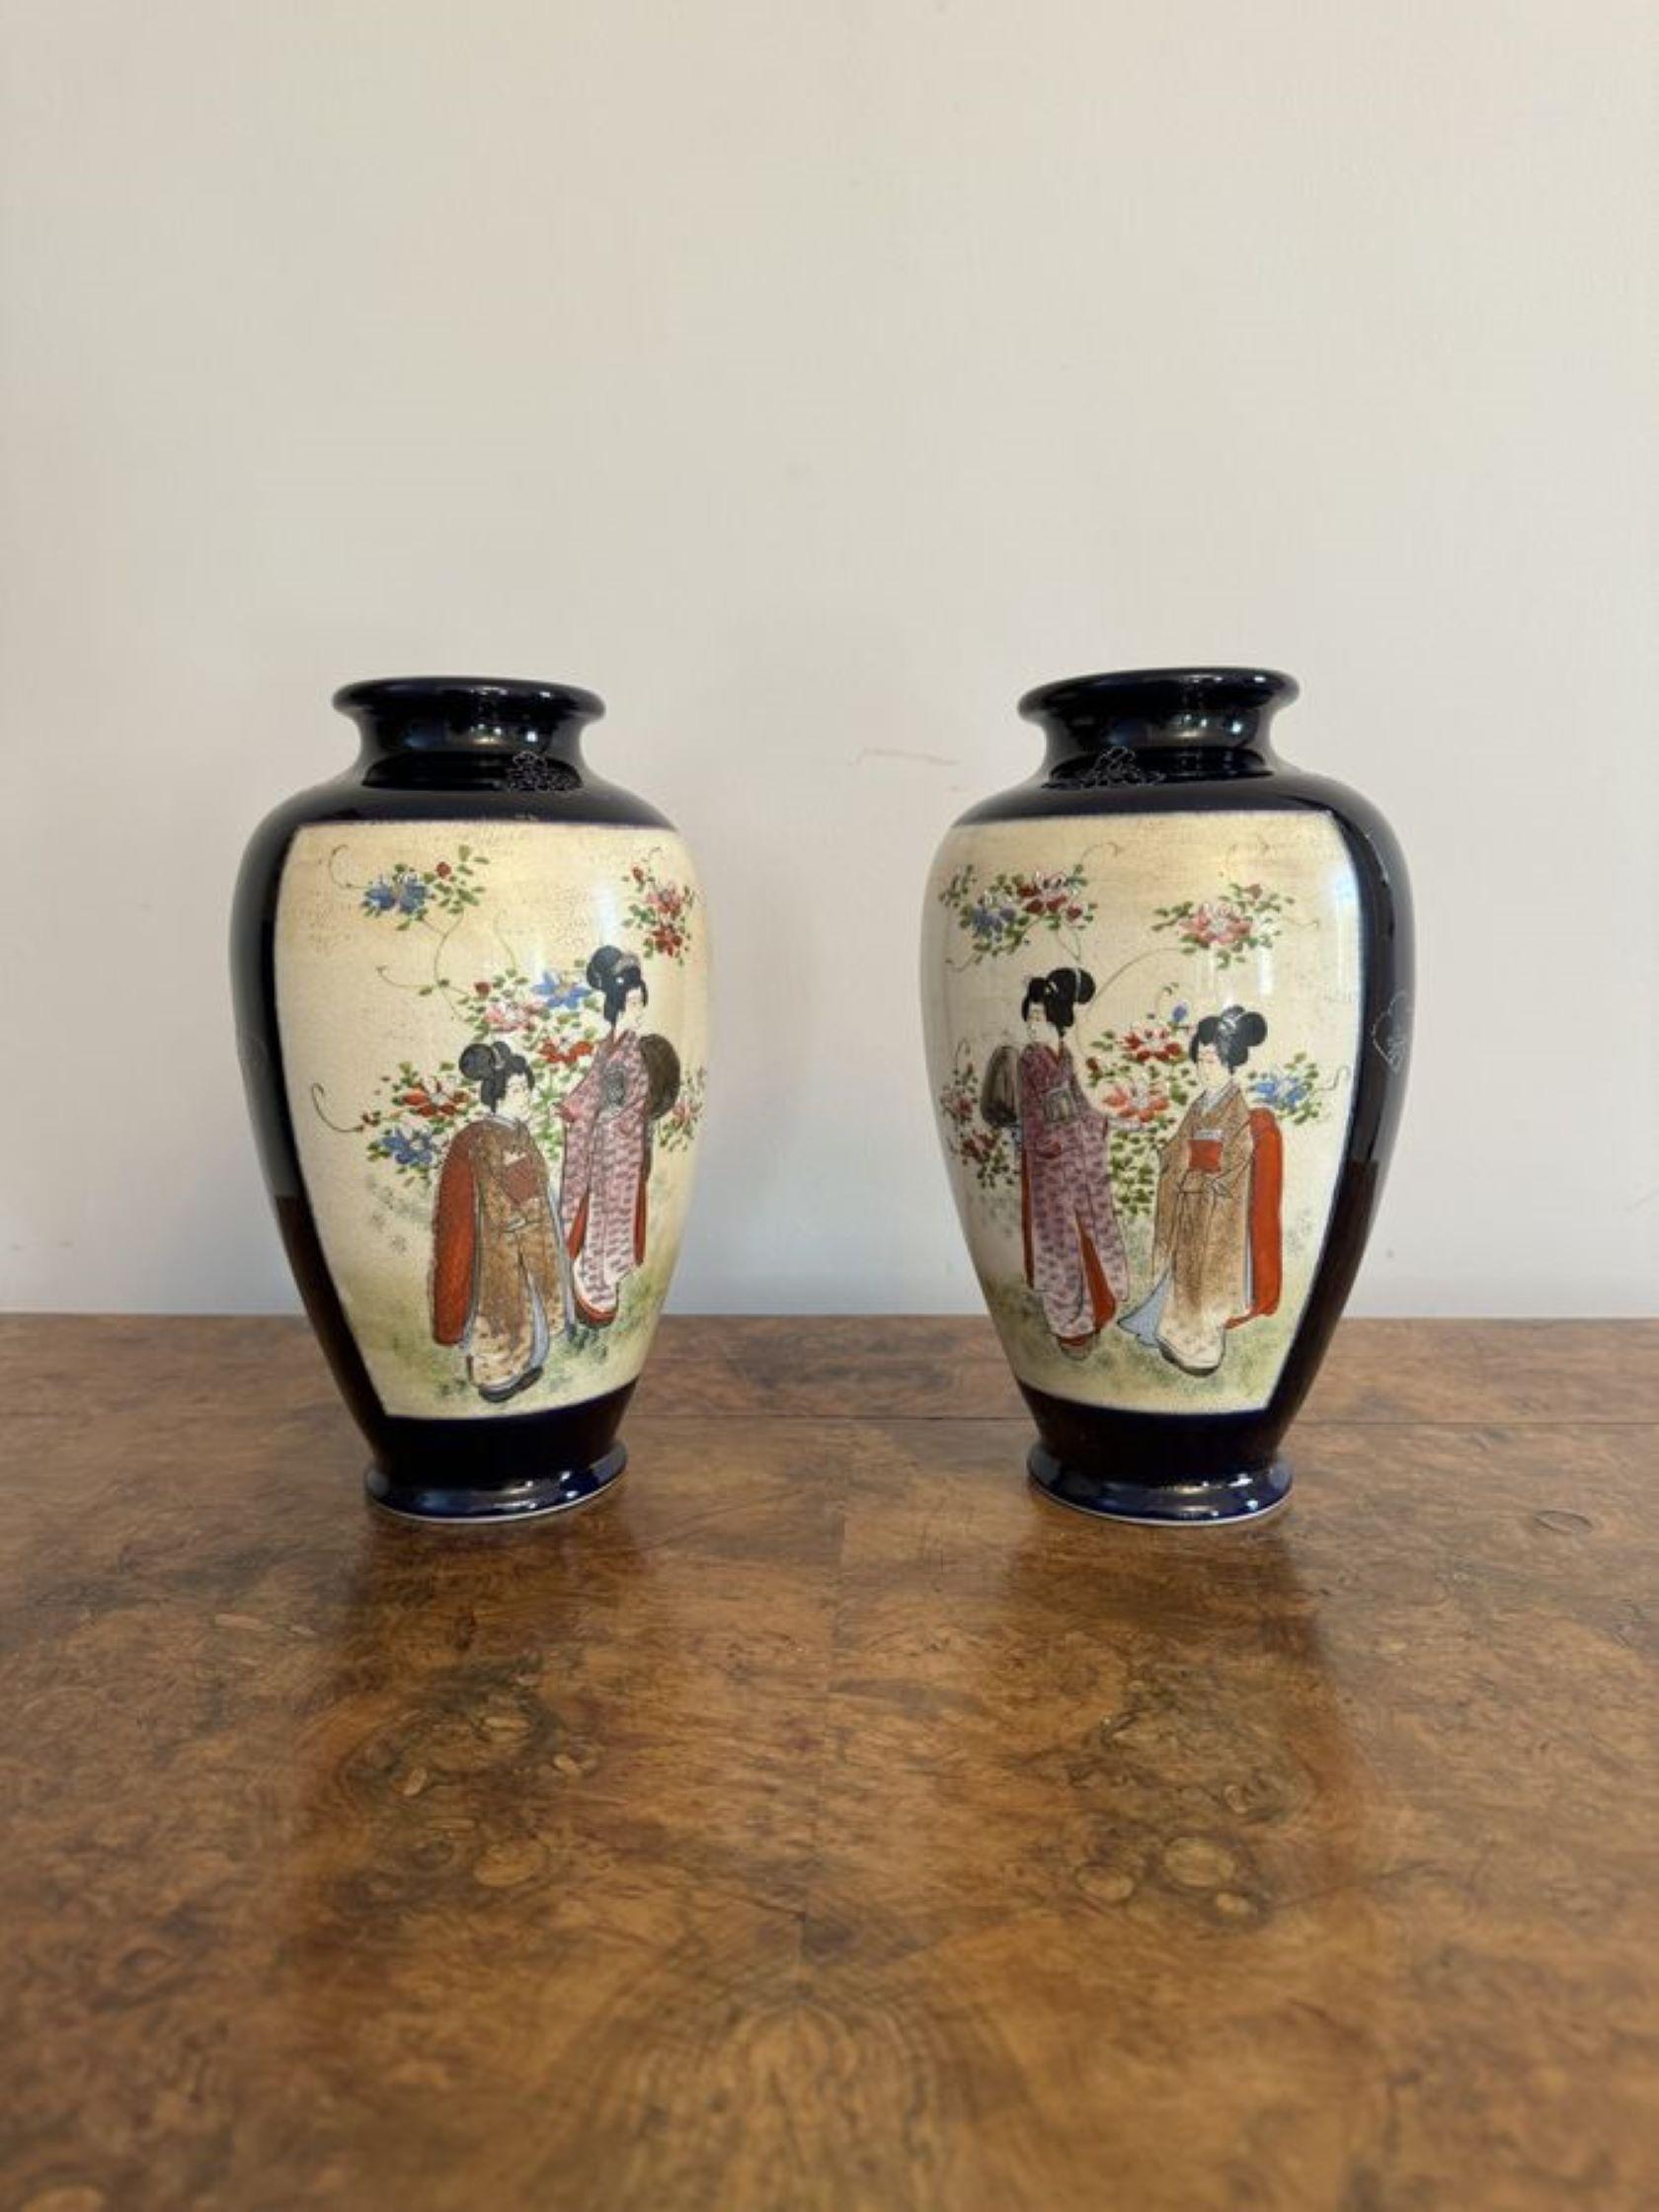 Wonderful quality pair of antique Japanese satsuma vases having a quality pair of antique Japanese satsuma vases with wonderful hand painted decoration of figural and landscape scenes in blue, red, orange, green, black and gold colours on a blue and